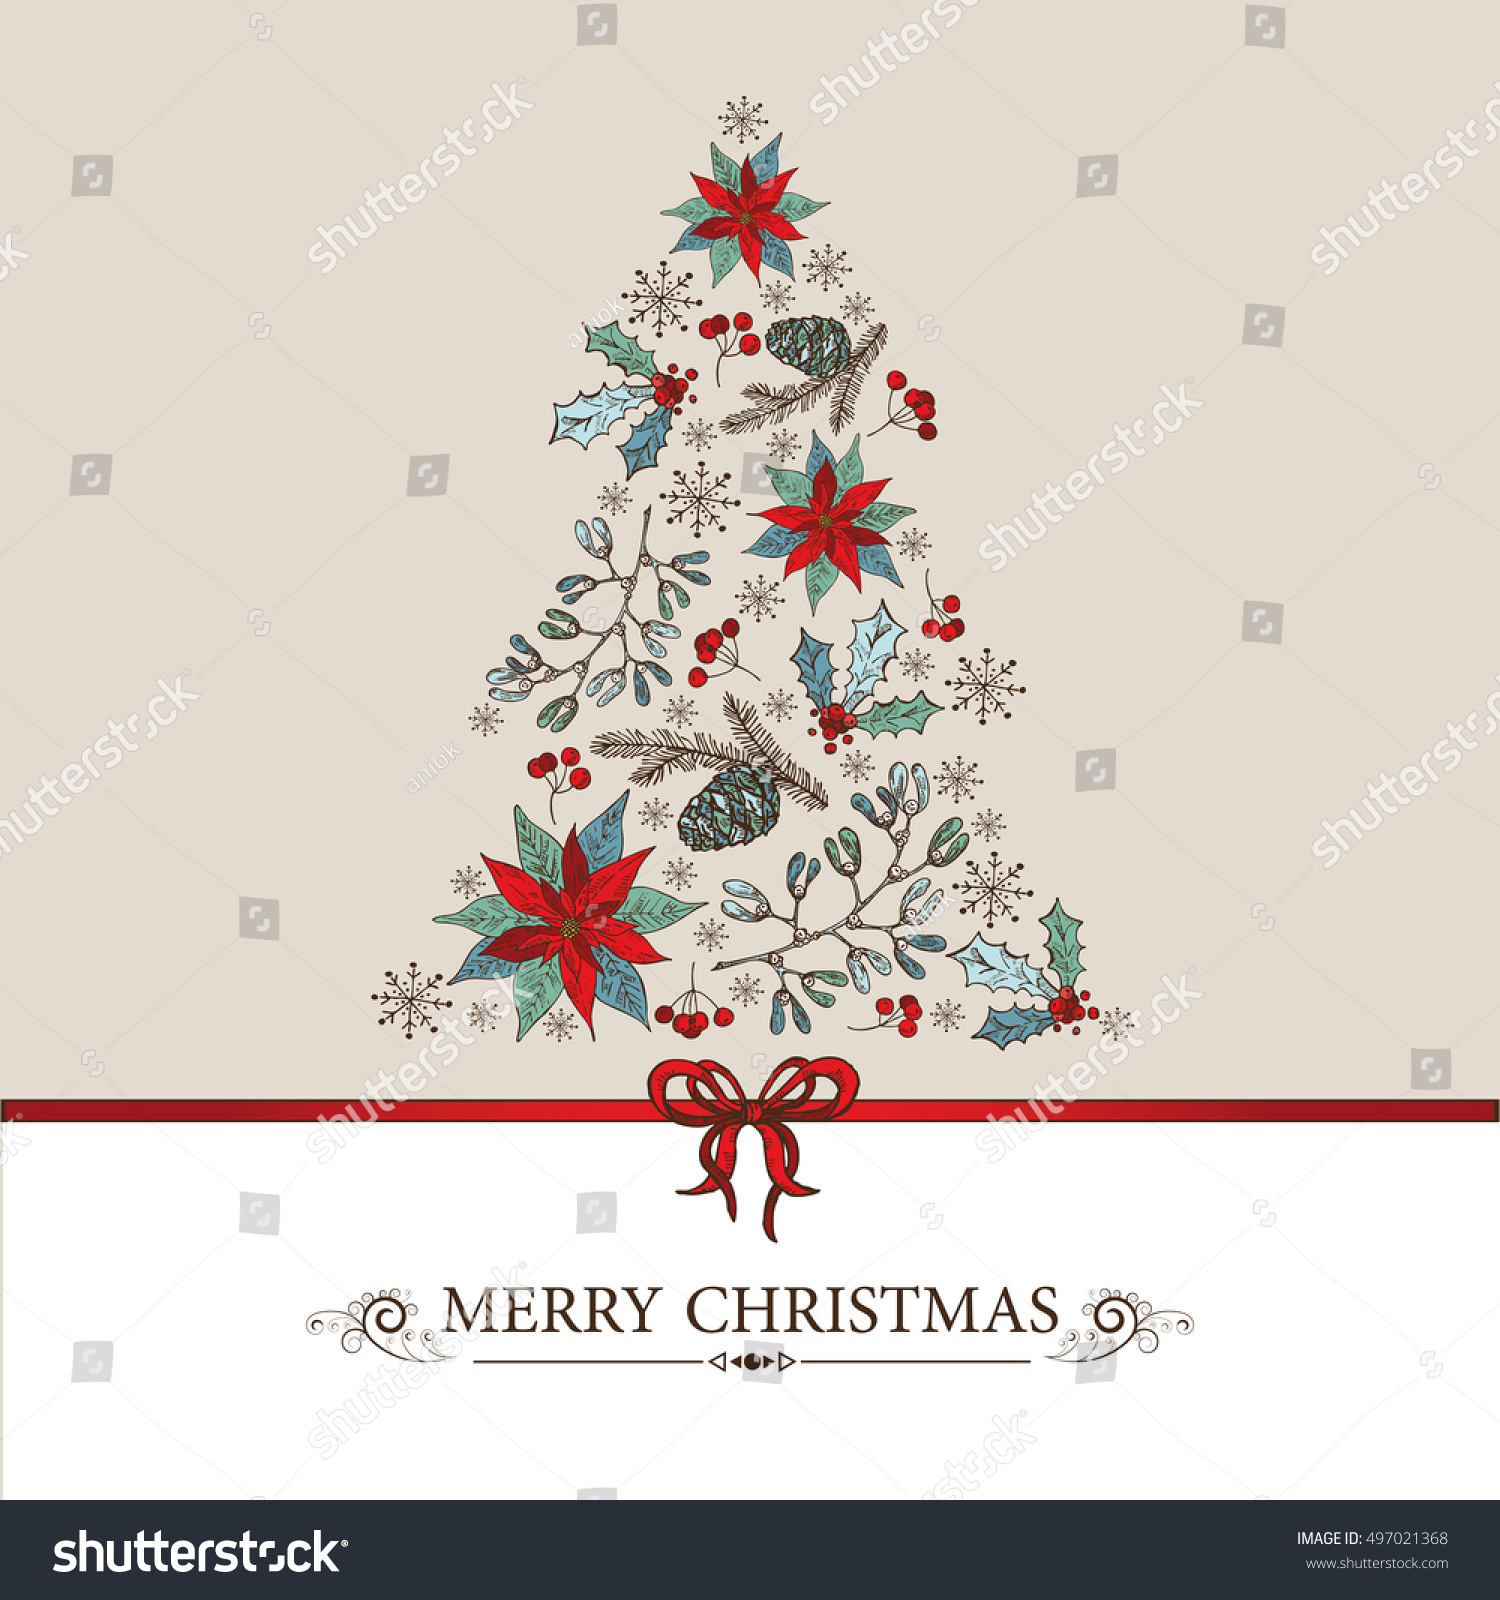 Christmas And New Year card with Christmas tree with cones holly and mistletoe hand